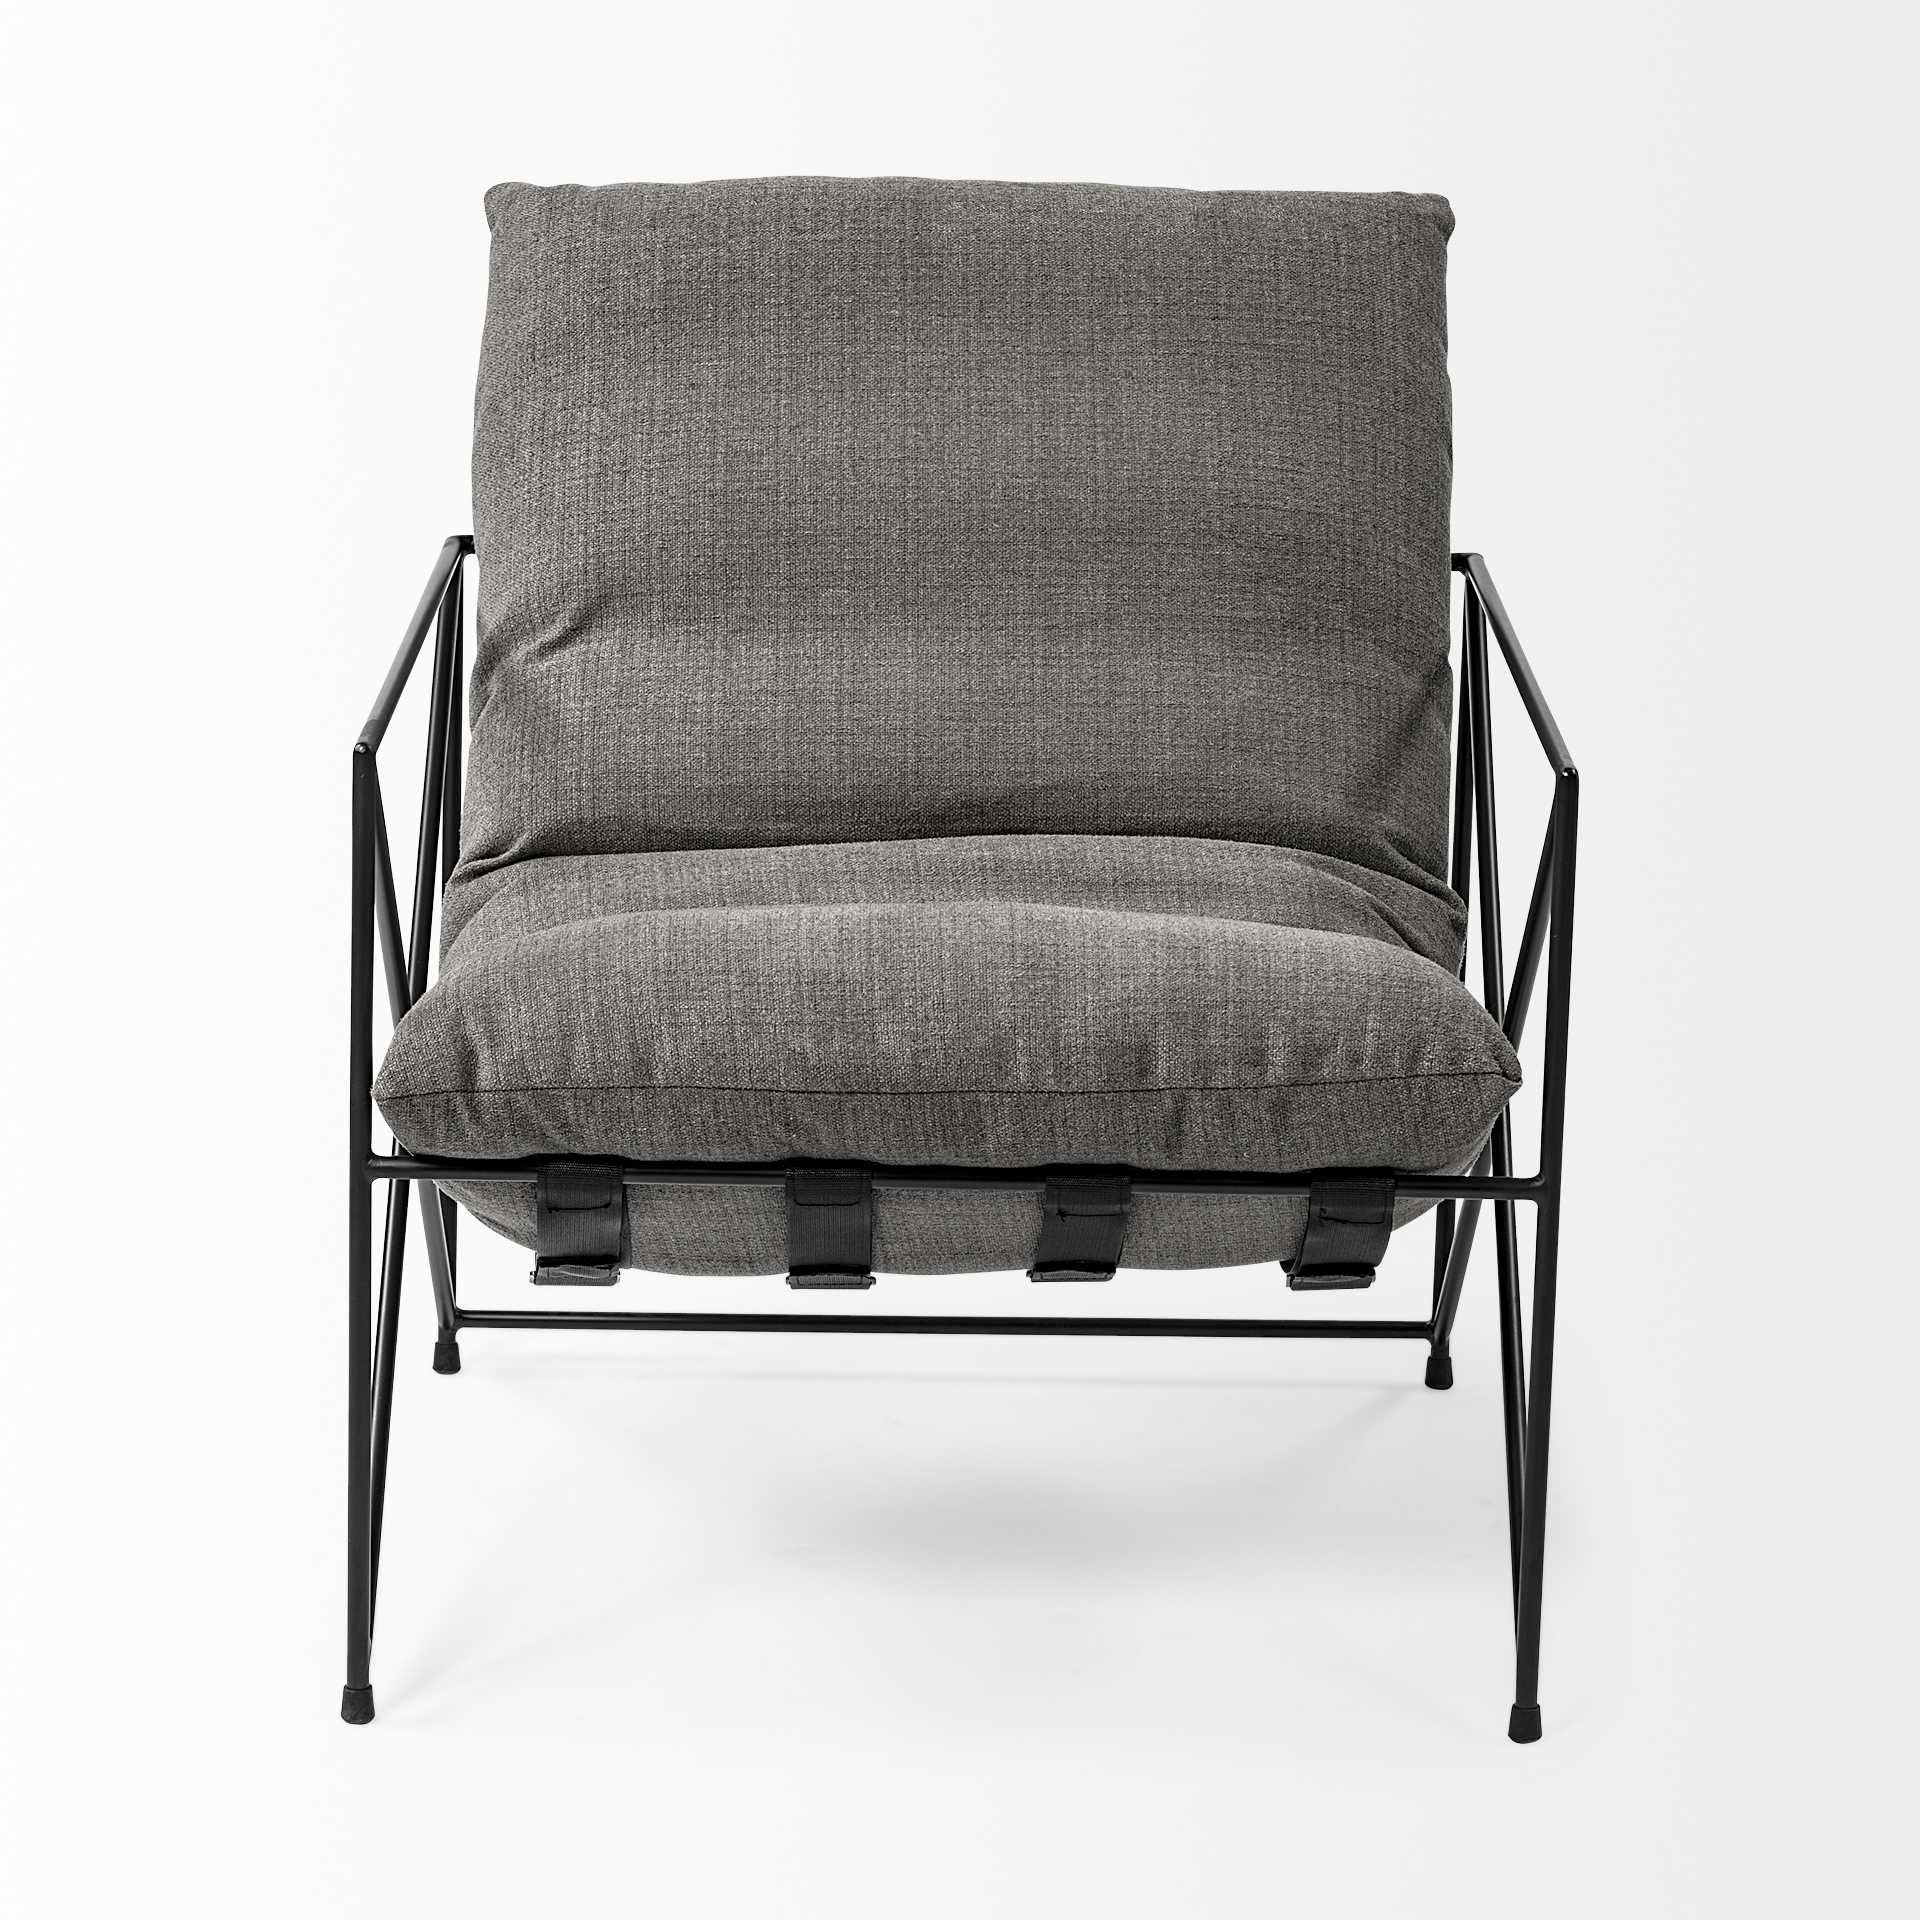 30" Gray And Black Linen Arm Chair